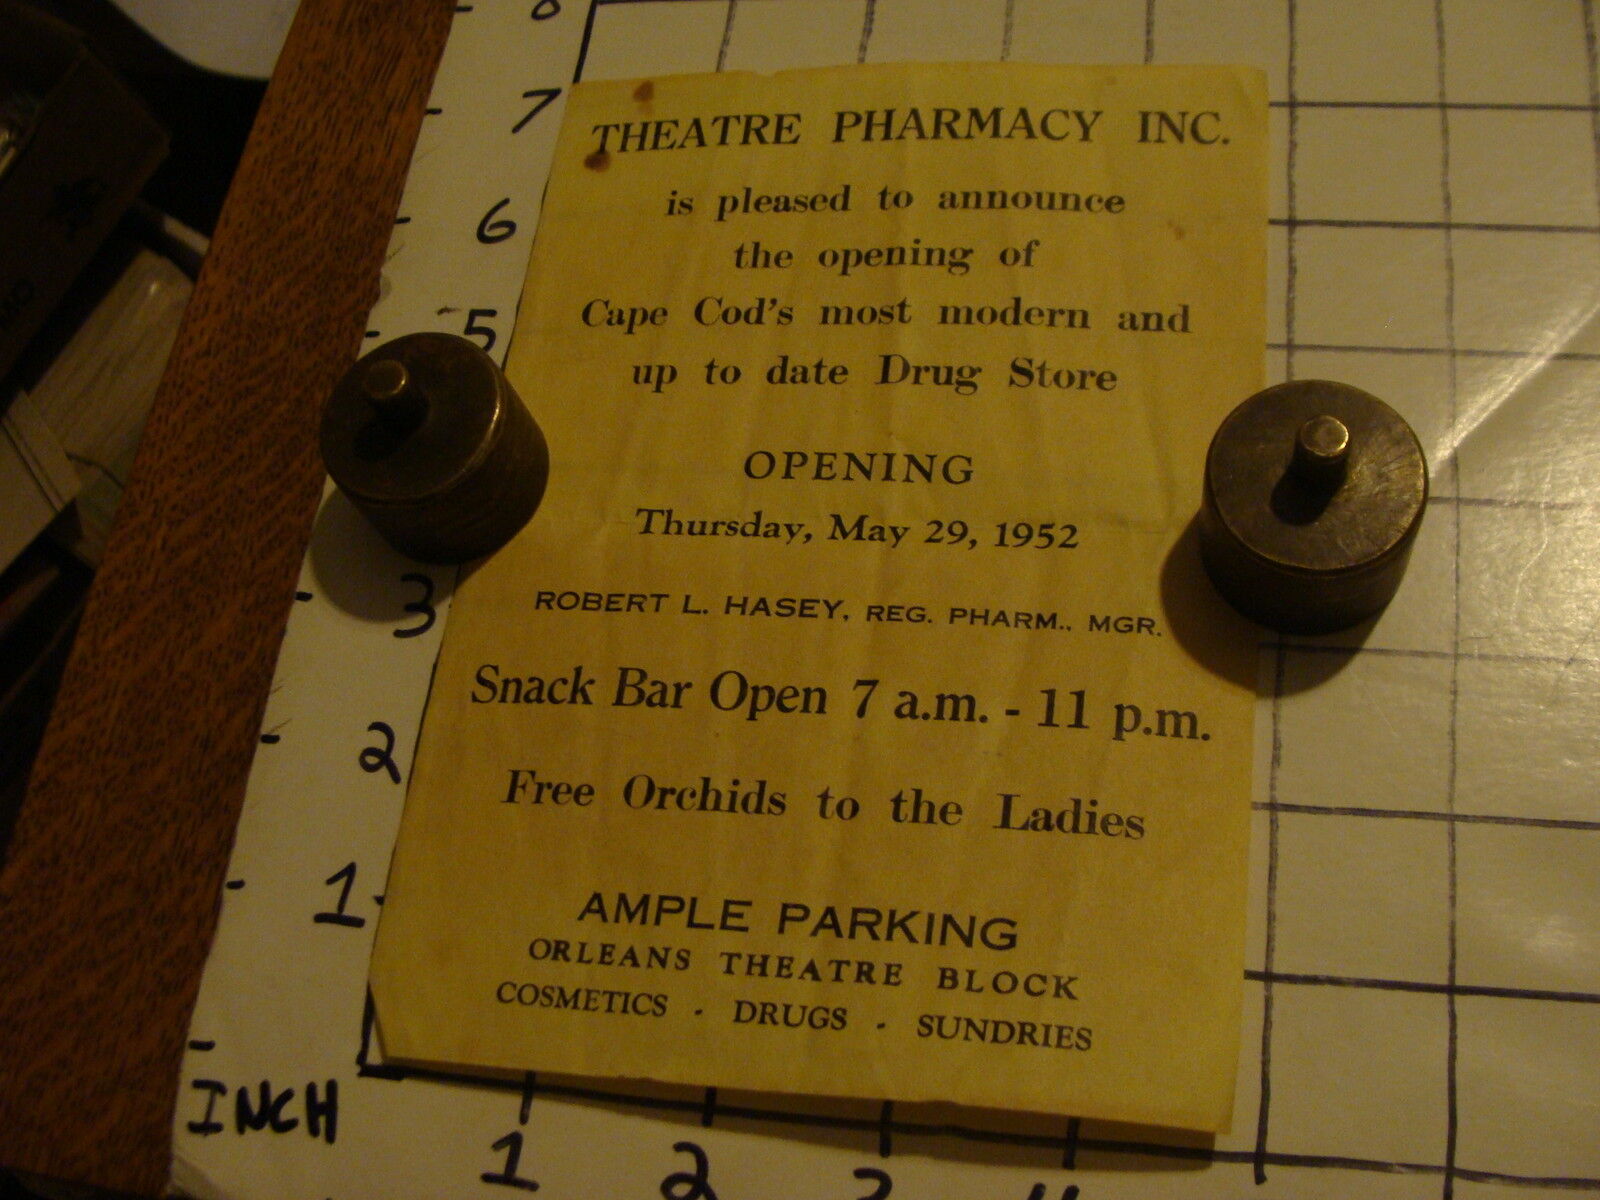 ORIGINAL May 29, 1952 THEATRE PHARMACY opening on CAPE COD orchids for ladies